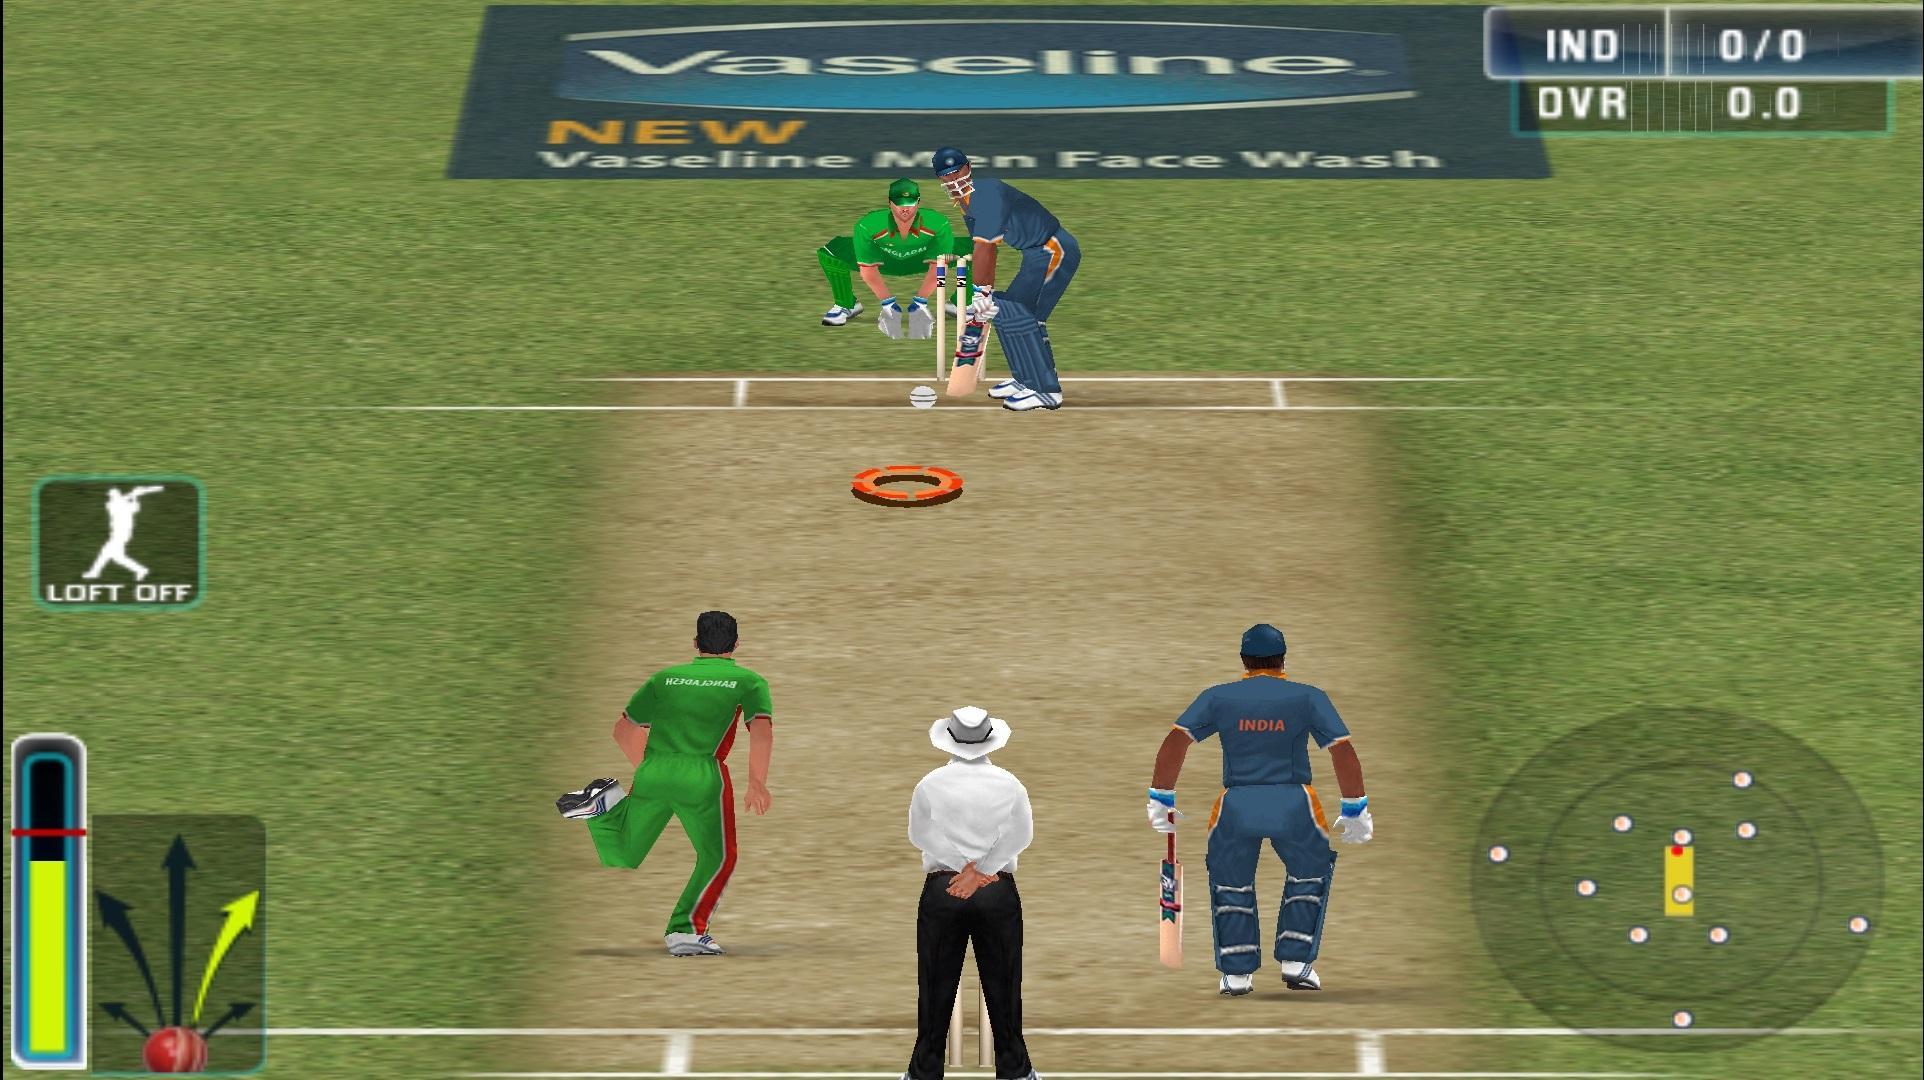 best cricket games for android